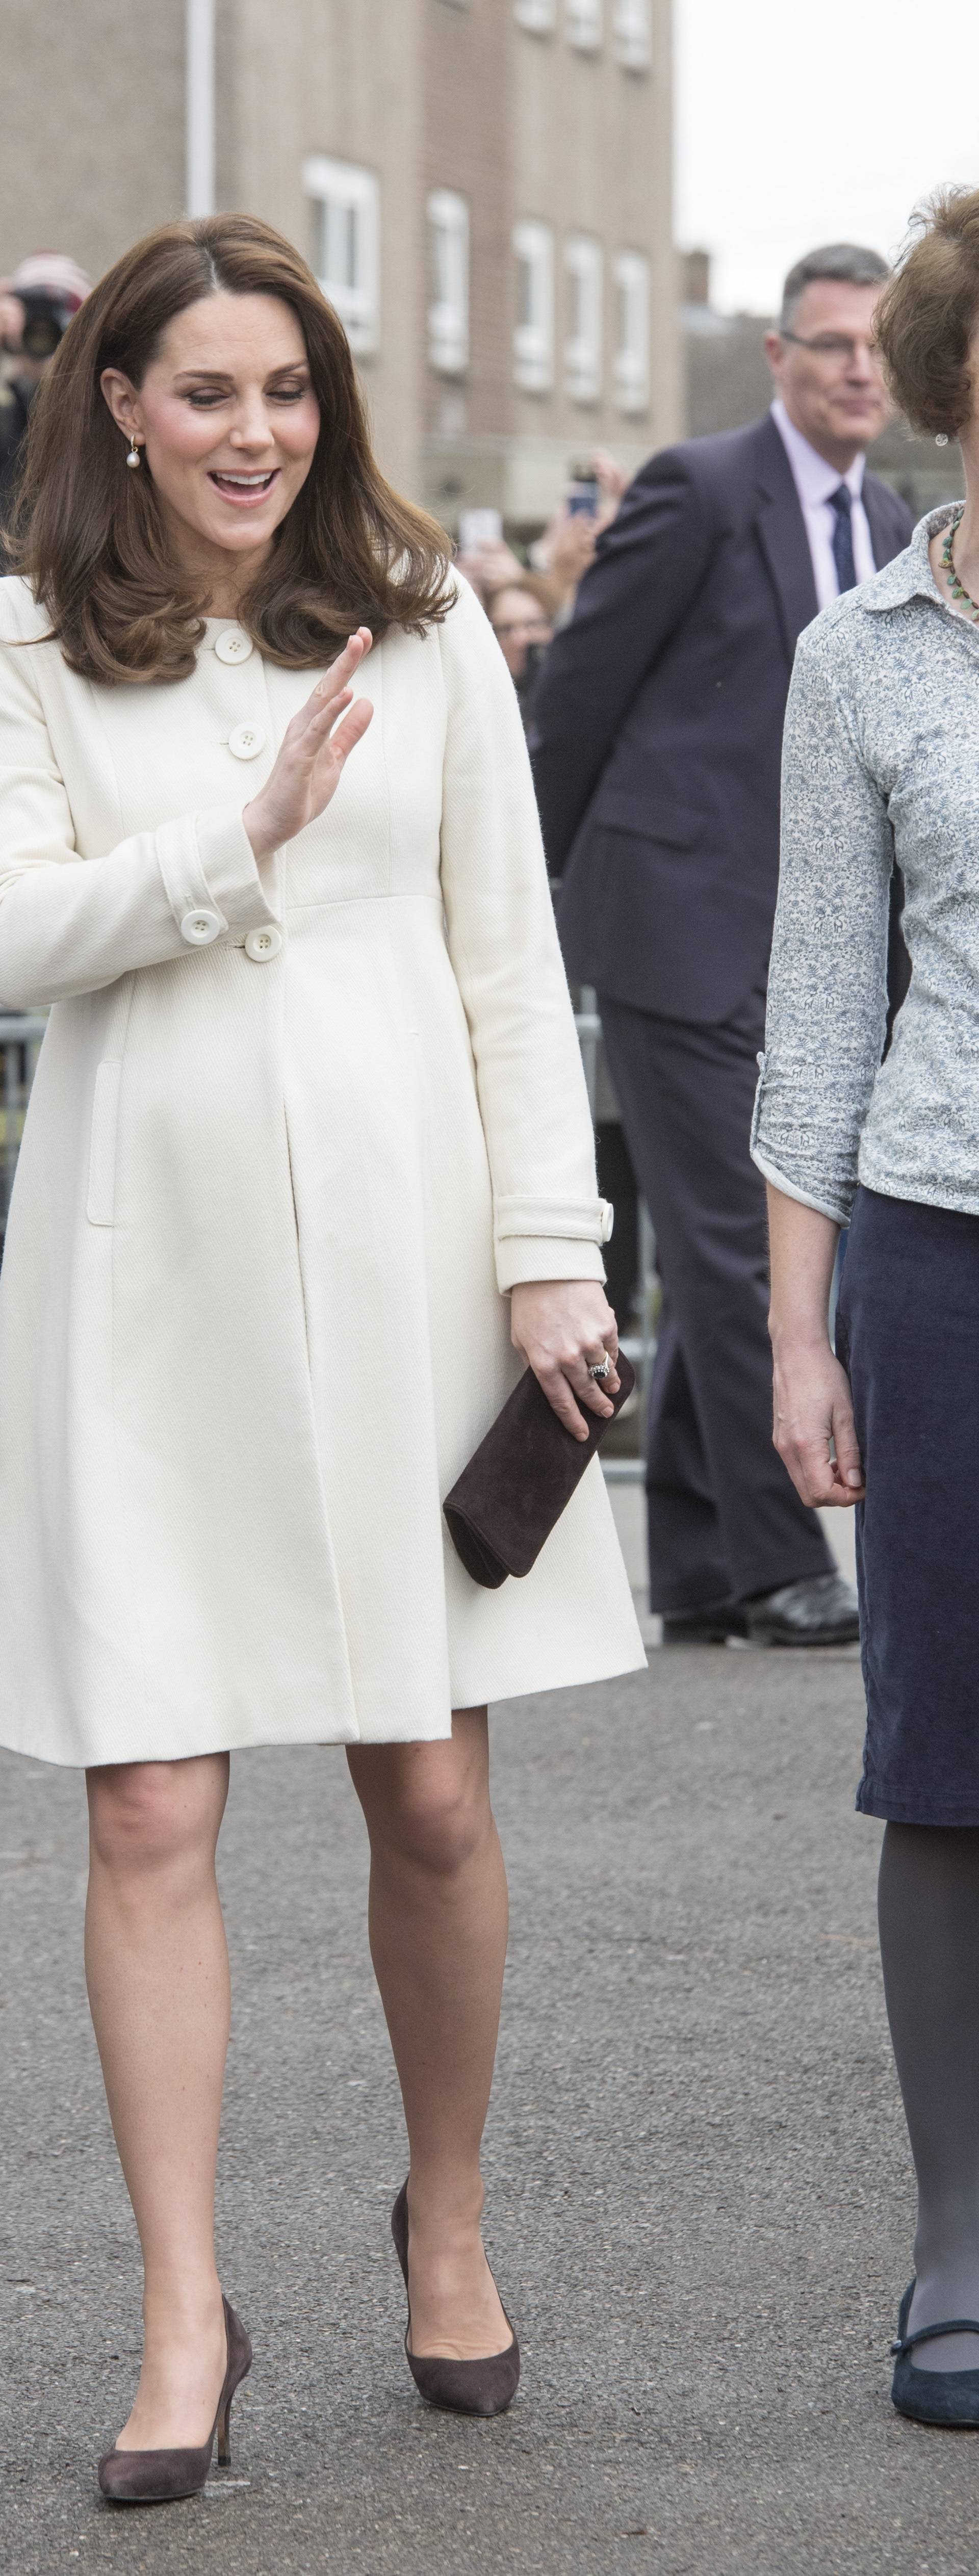 The Duchess of Cambridge visits Oxford